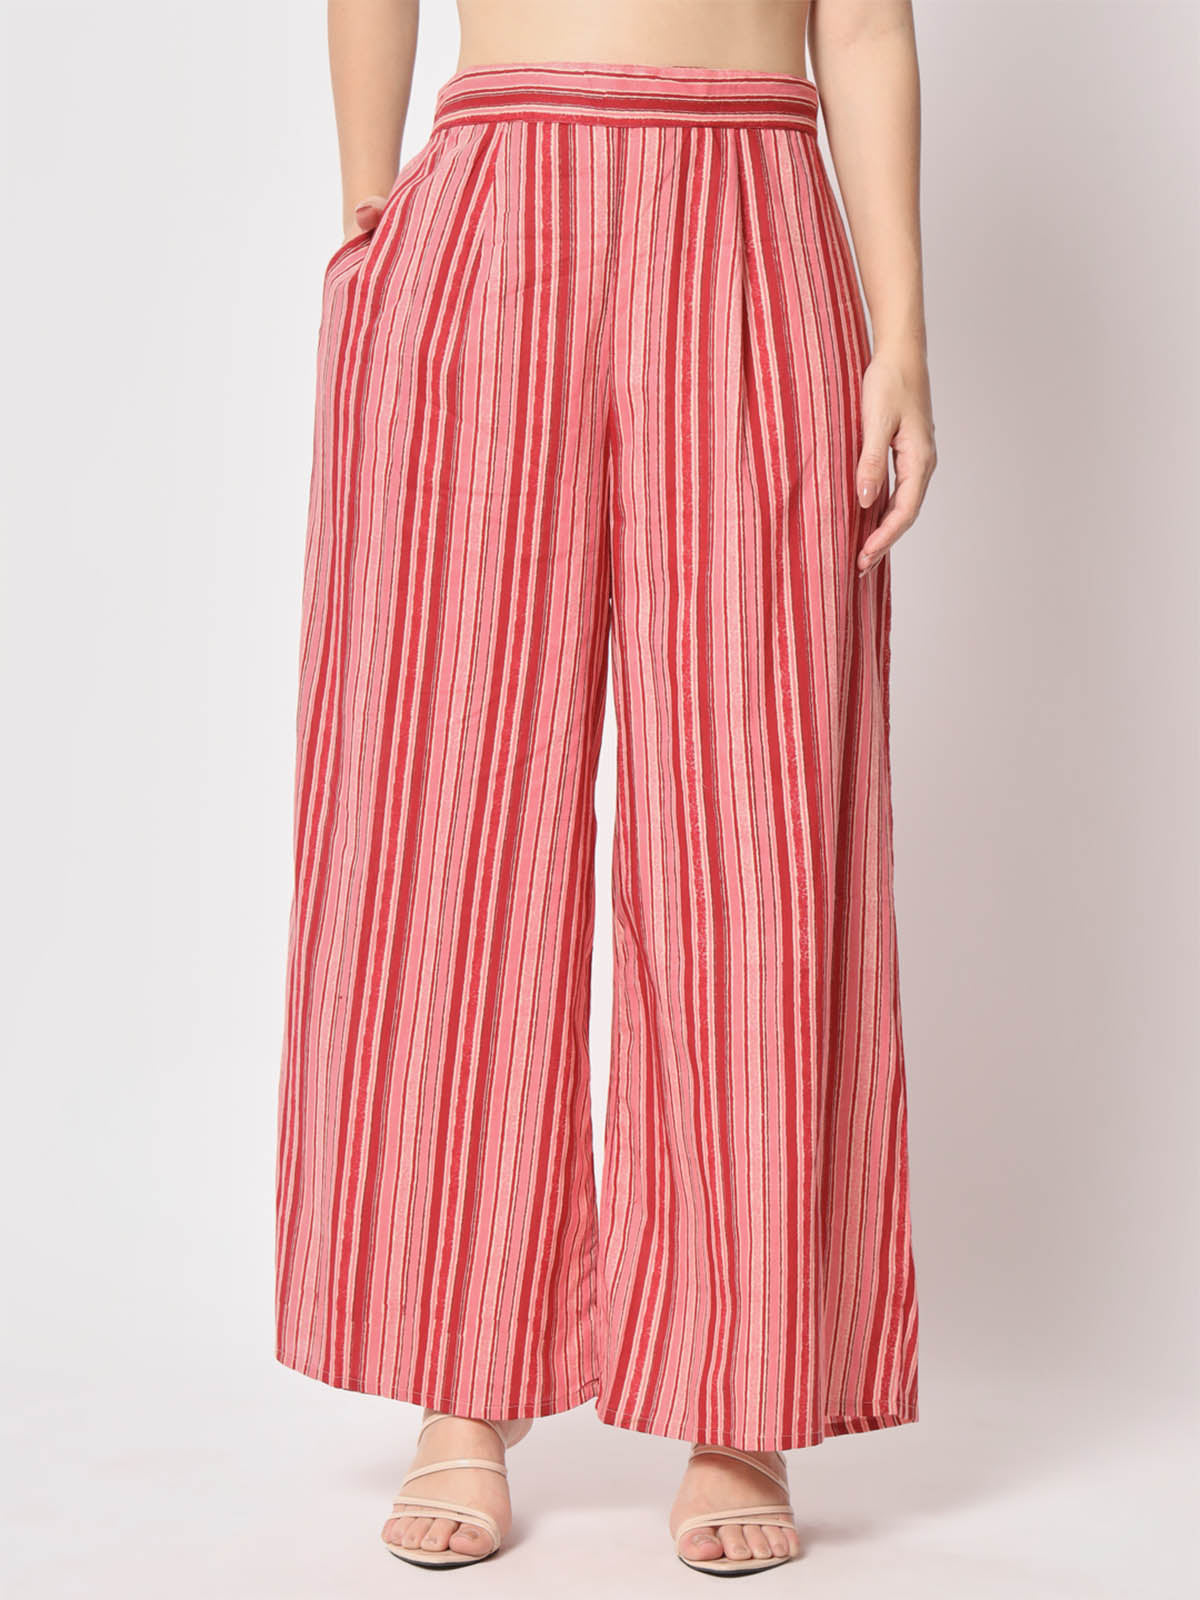 Odette - Pretty Red Cotton Printed Stitched Pant